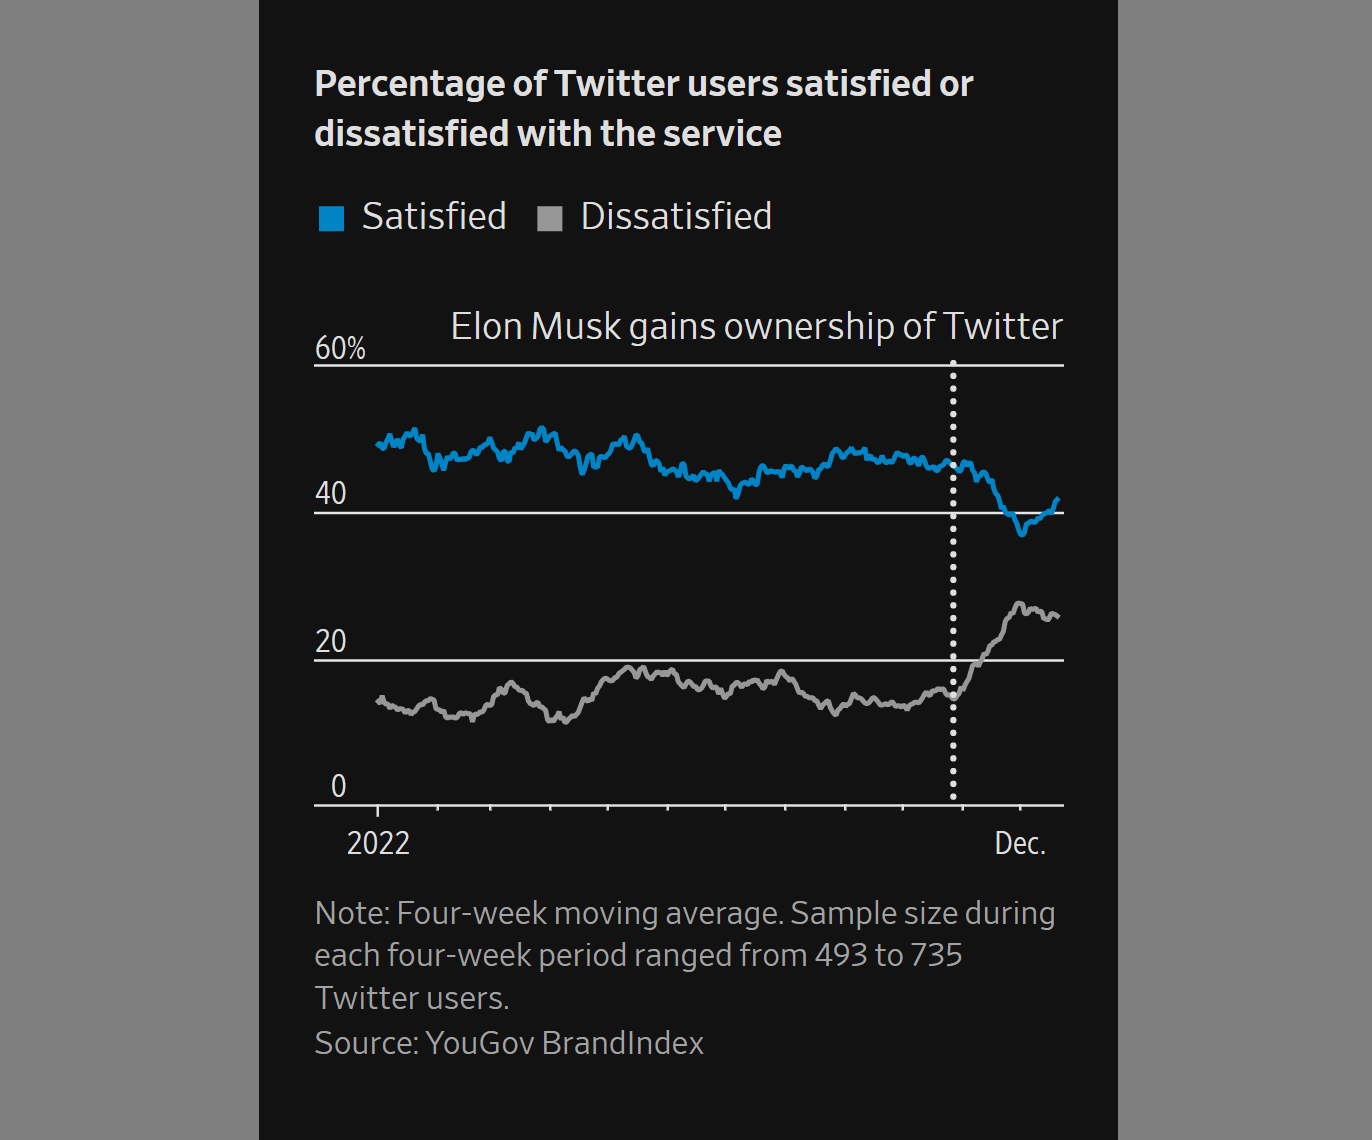 Nom : percentage-of-twitter-users-satisfied-or-dissatisfied-with-the-service.png
Affichages : 1804
Taille : 97,7 Ko